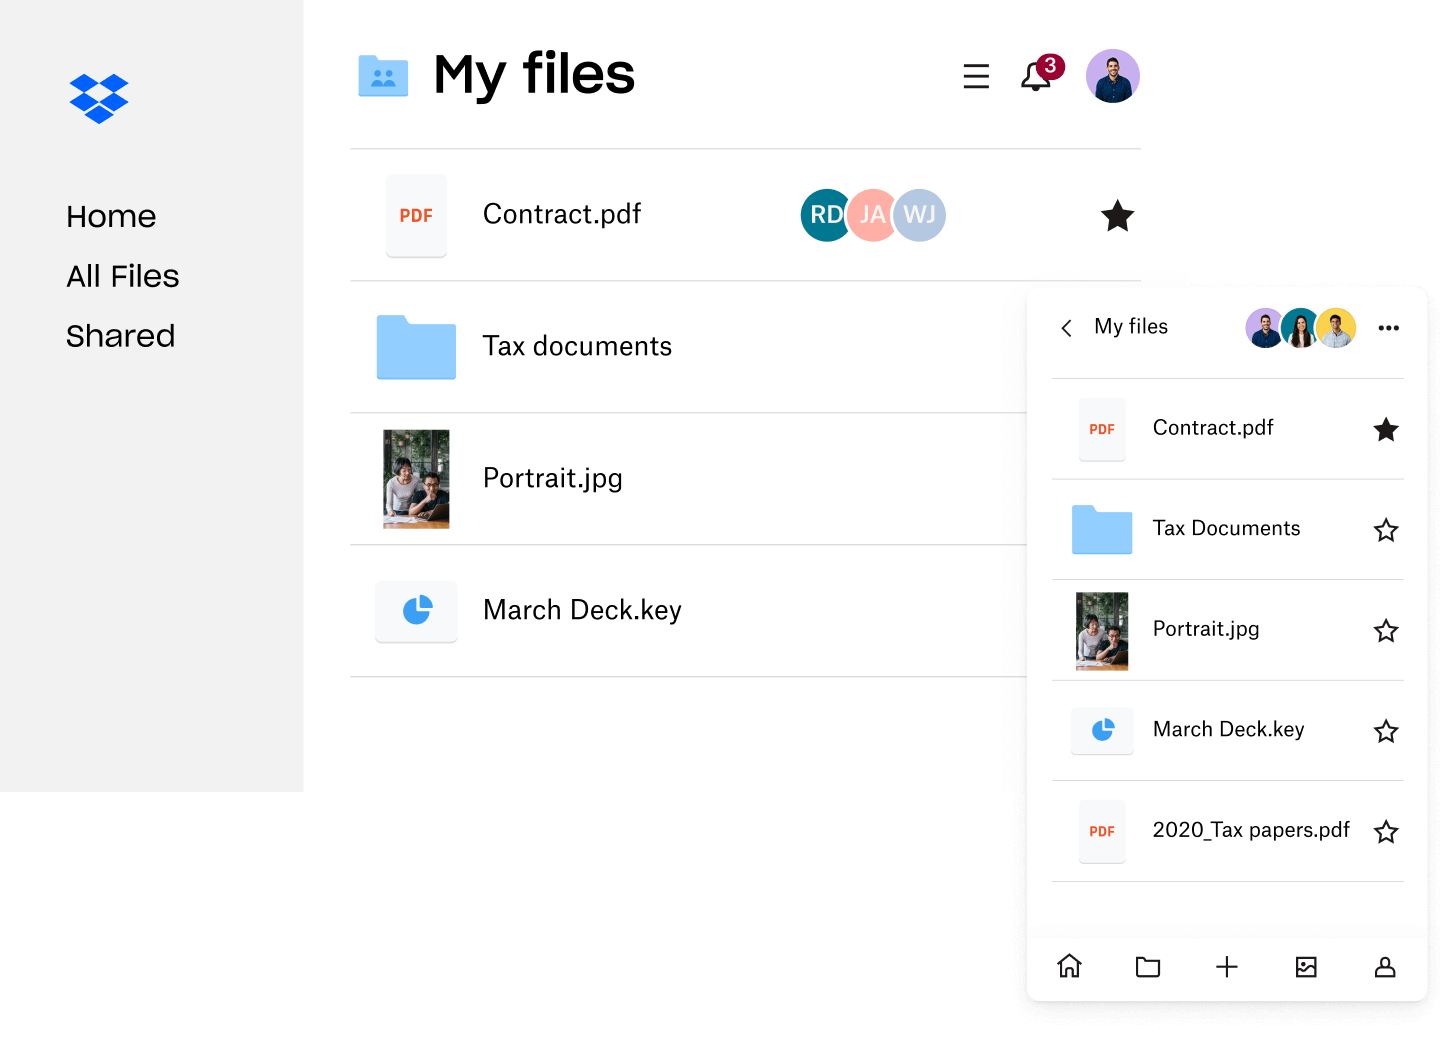 Image of files and folders that are organized and stored in Dropbox